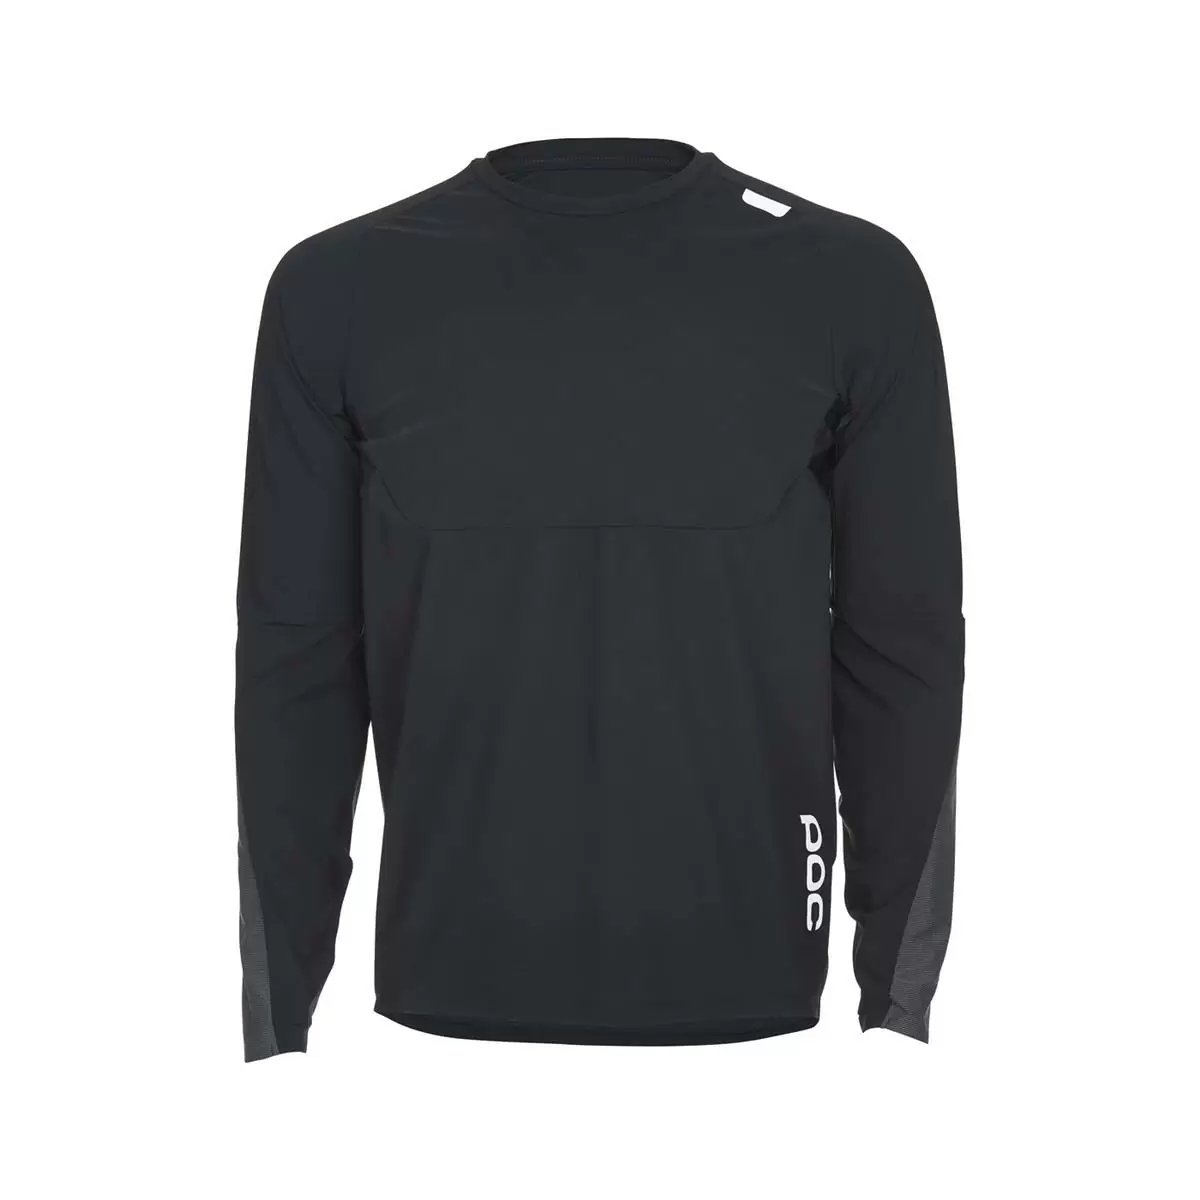 Resistance DH Long-Sleeve Jersey Black Size M - image